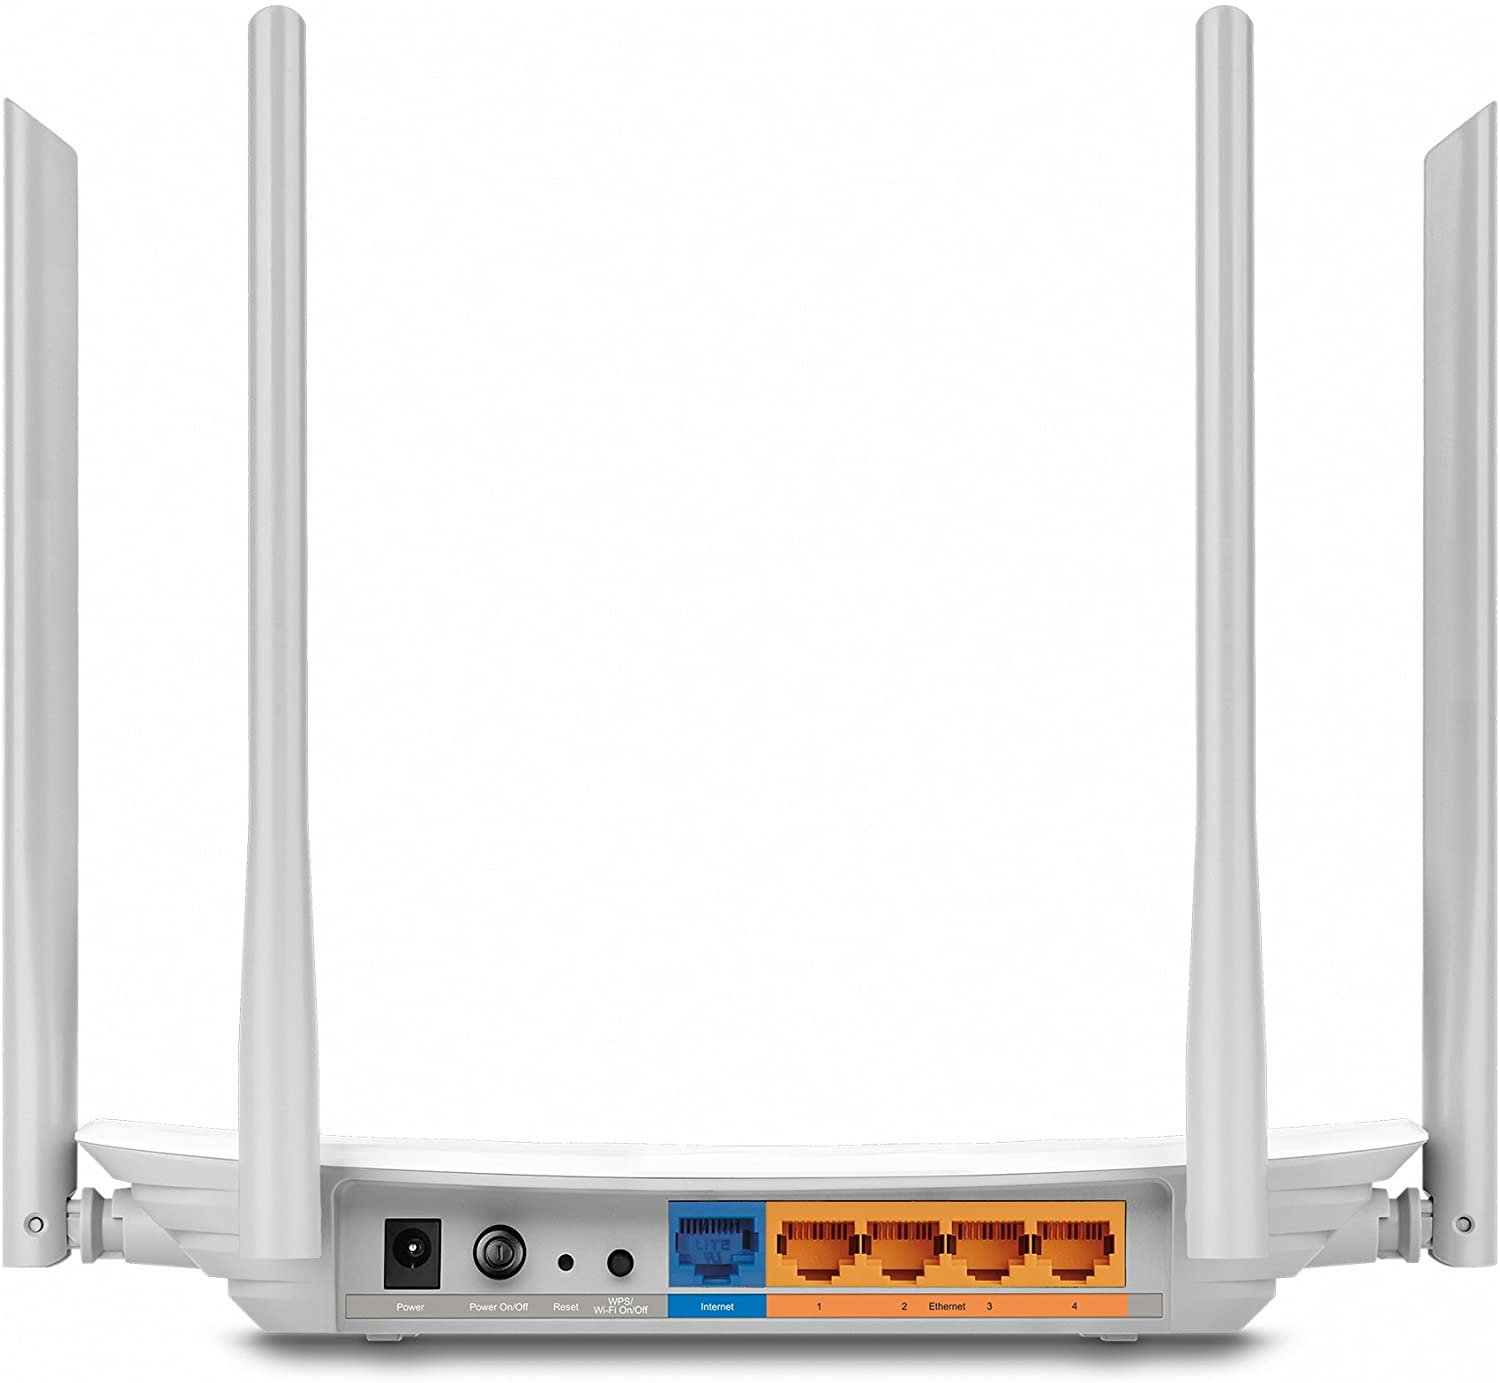 TP-Link (Archer C50 V3), AC1200 (867+300) Wireless Dual Band 10/100 Cable Router, 4-Port